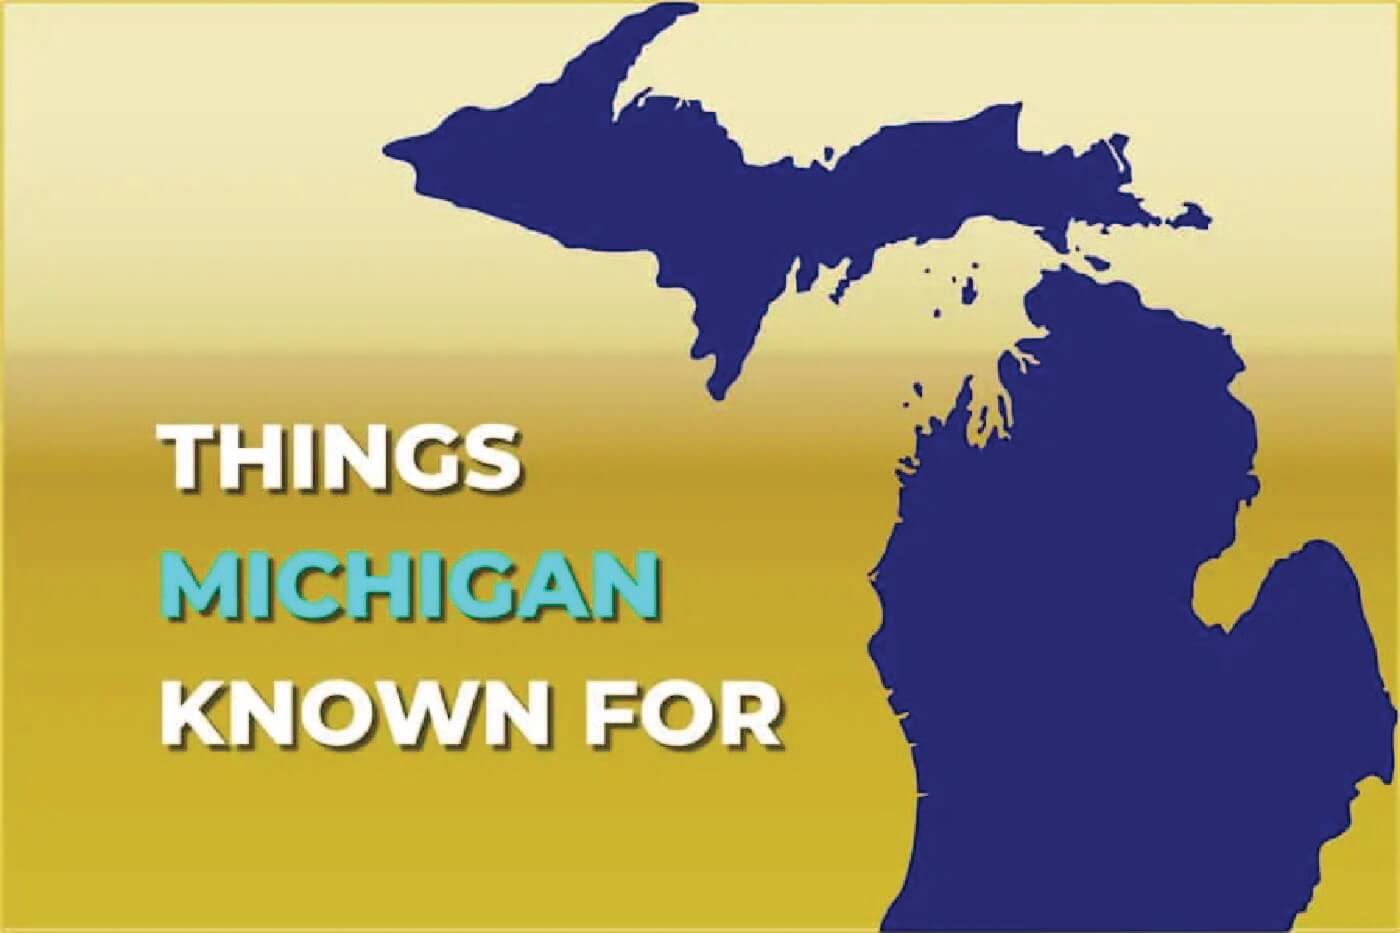 Things Michigan Known For